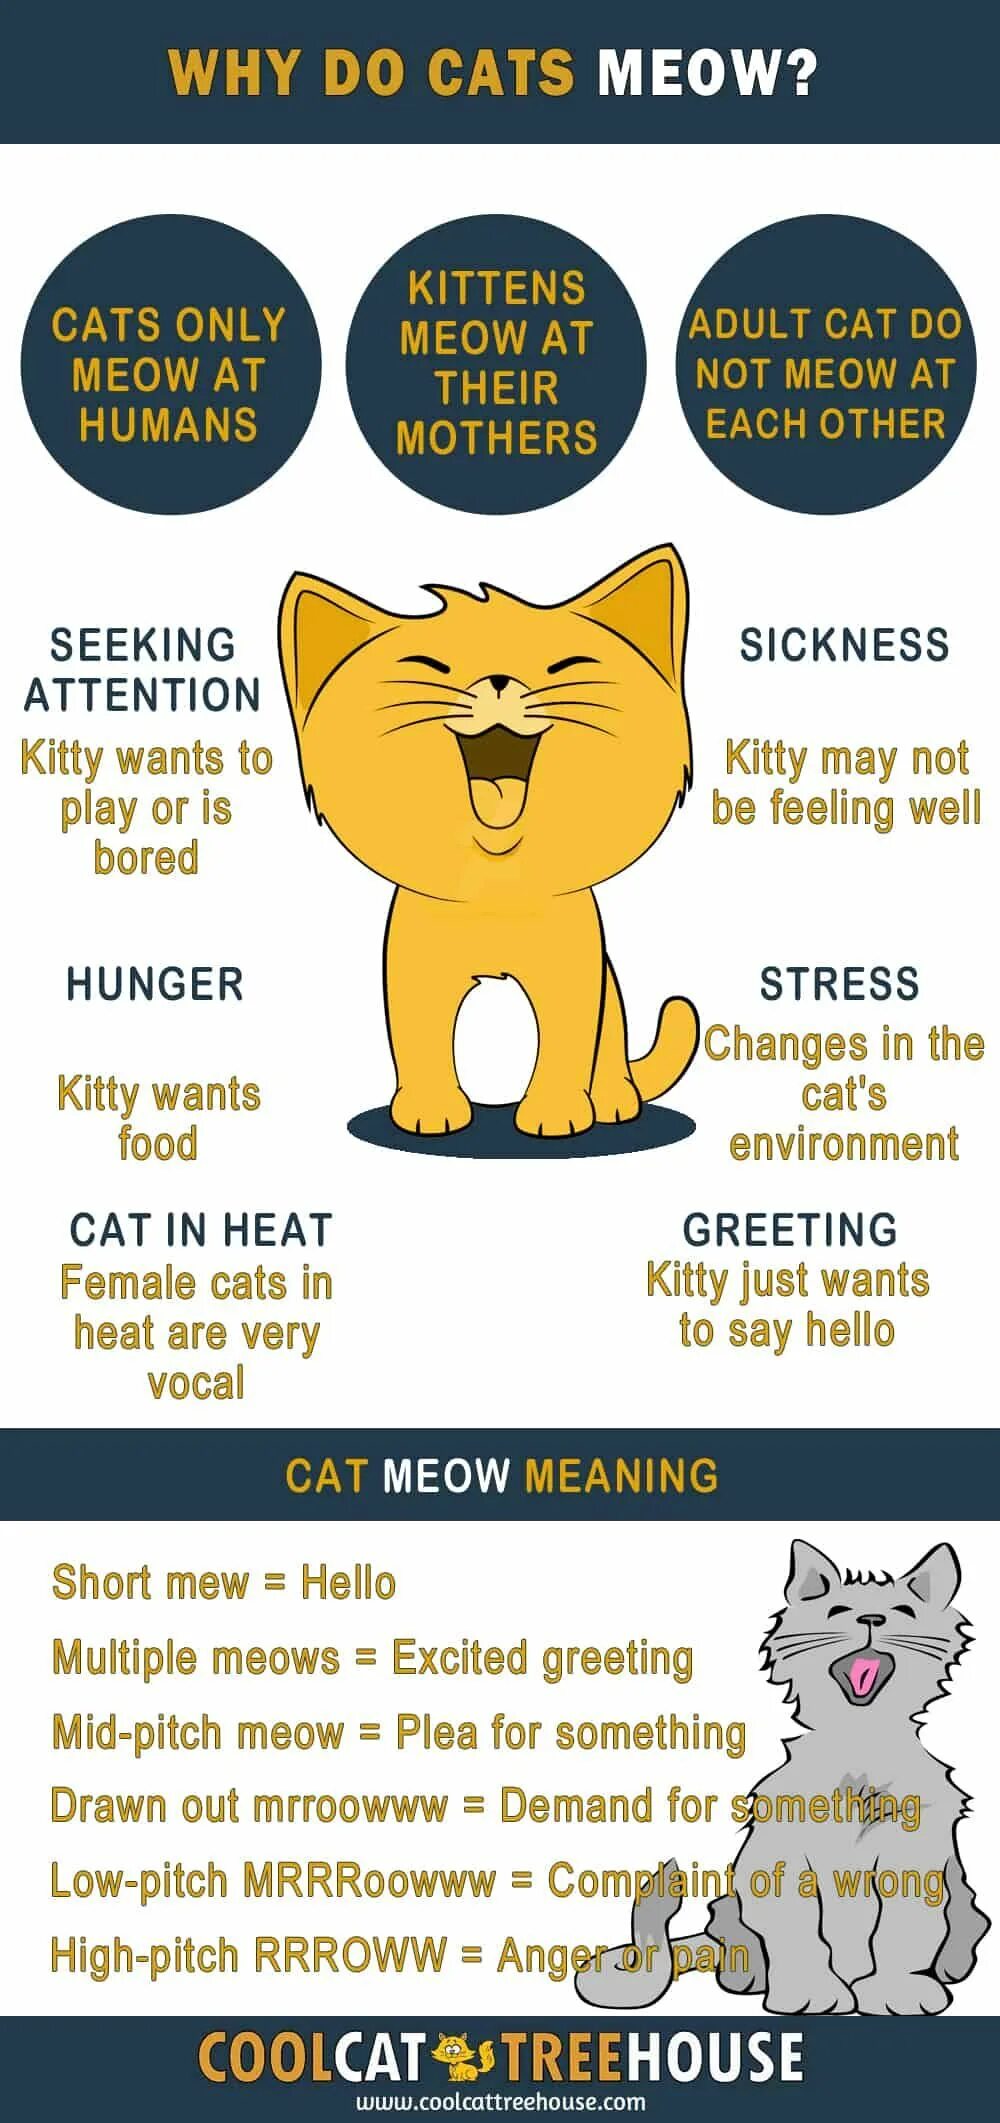 Cat meaning. Meow Meow Cat. Kitty Cat и Cat been. Идиома Cats Meow. Why Cat.